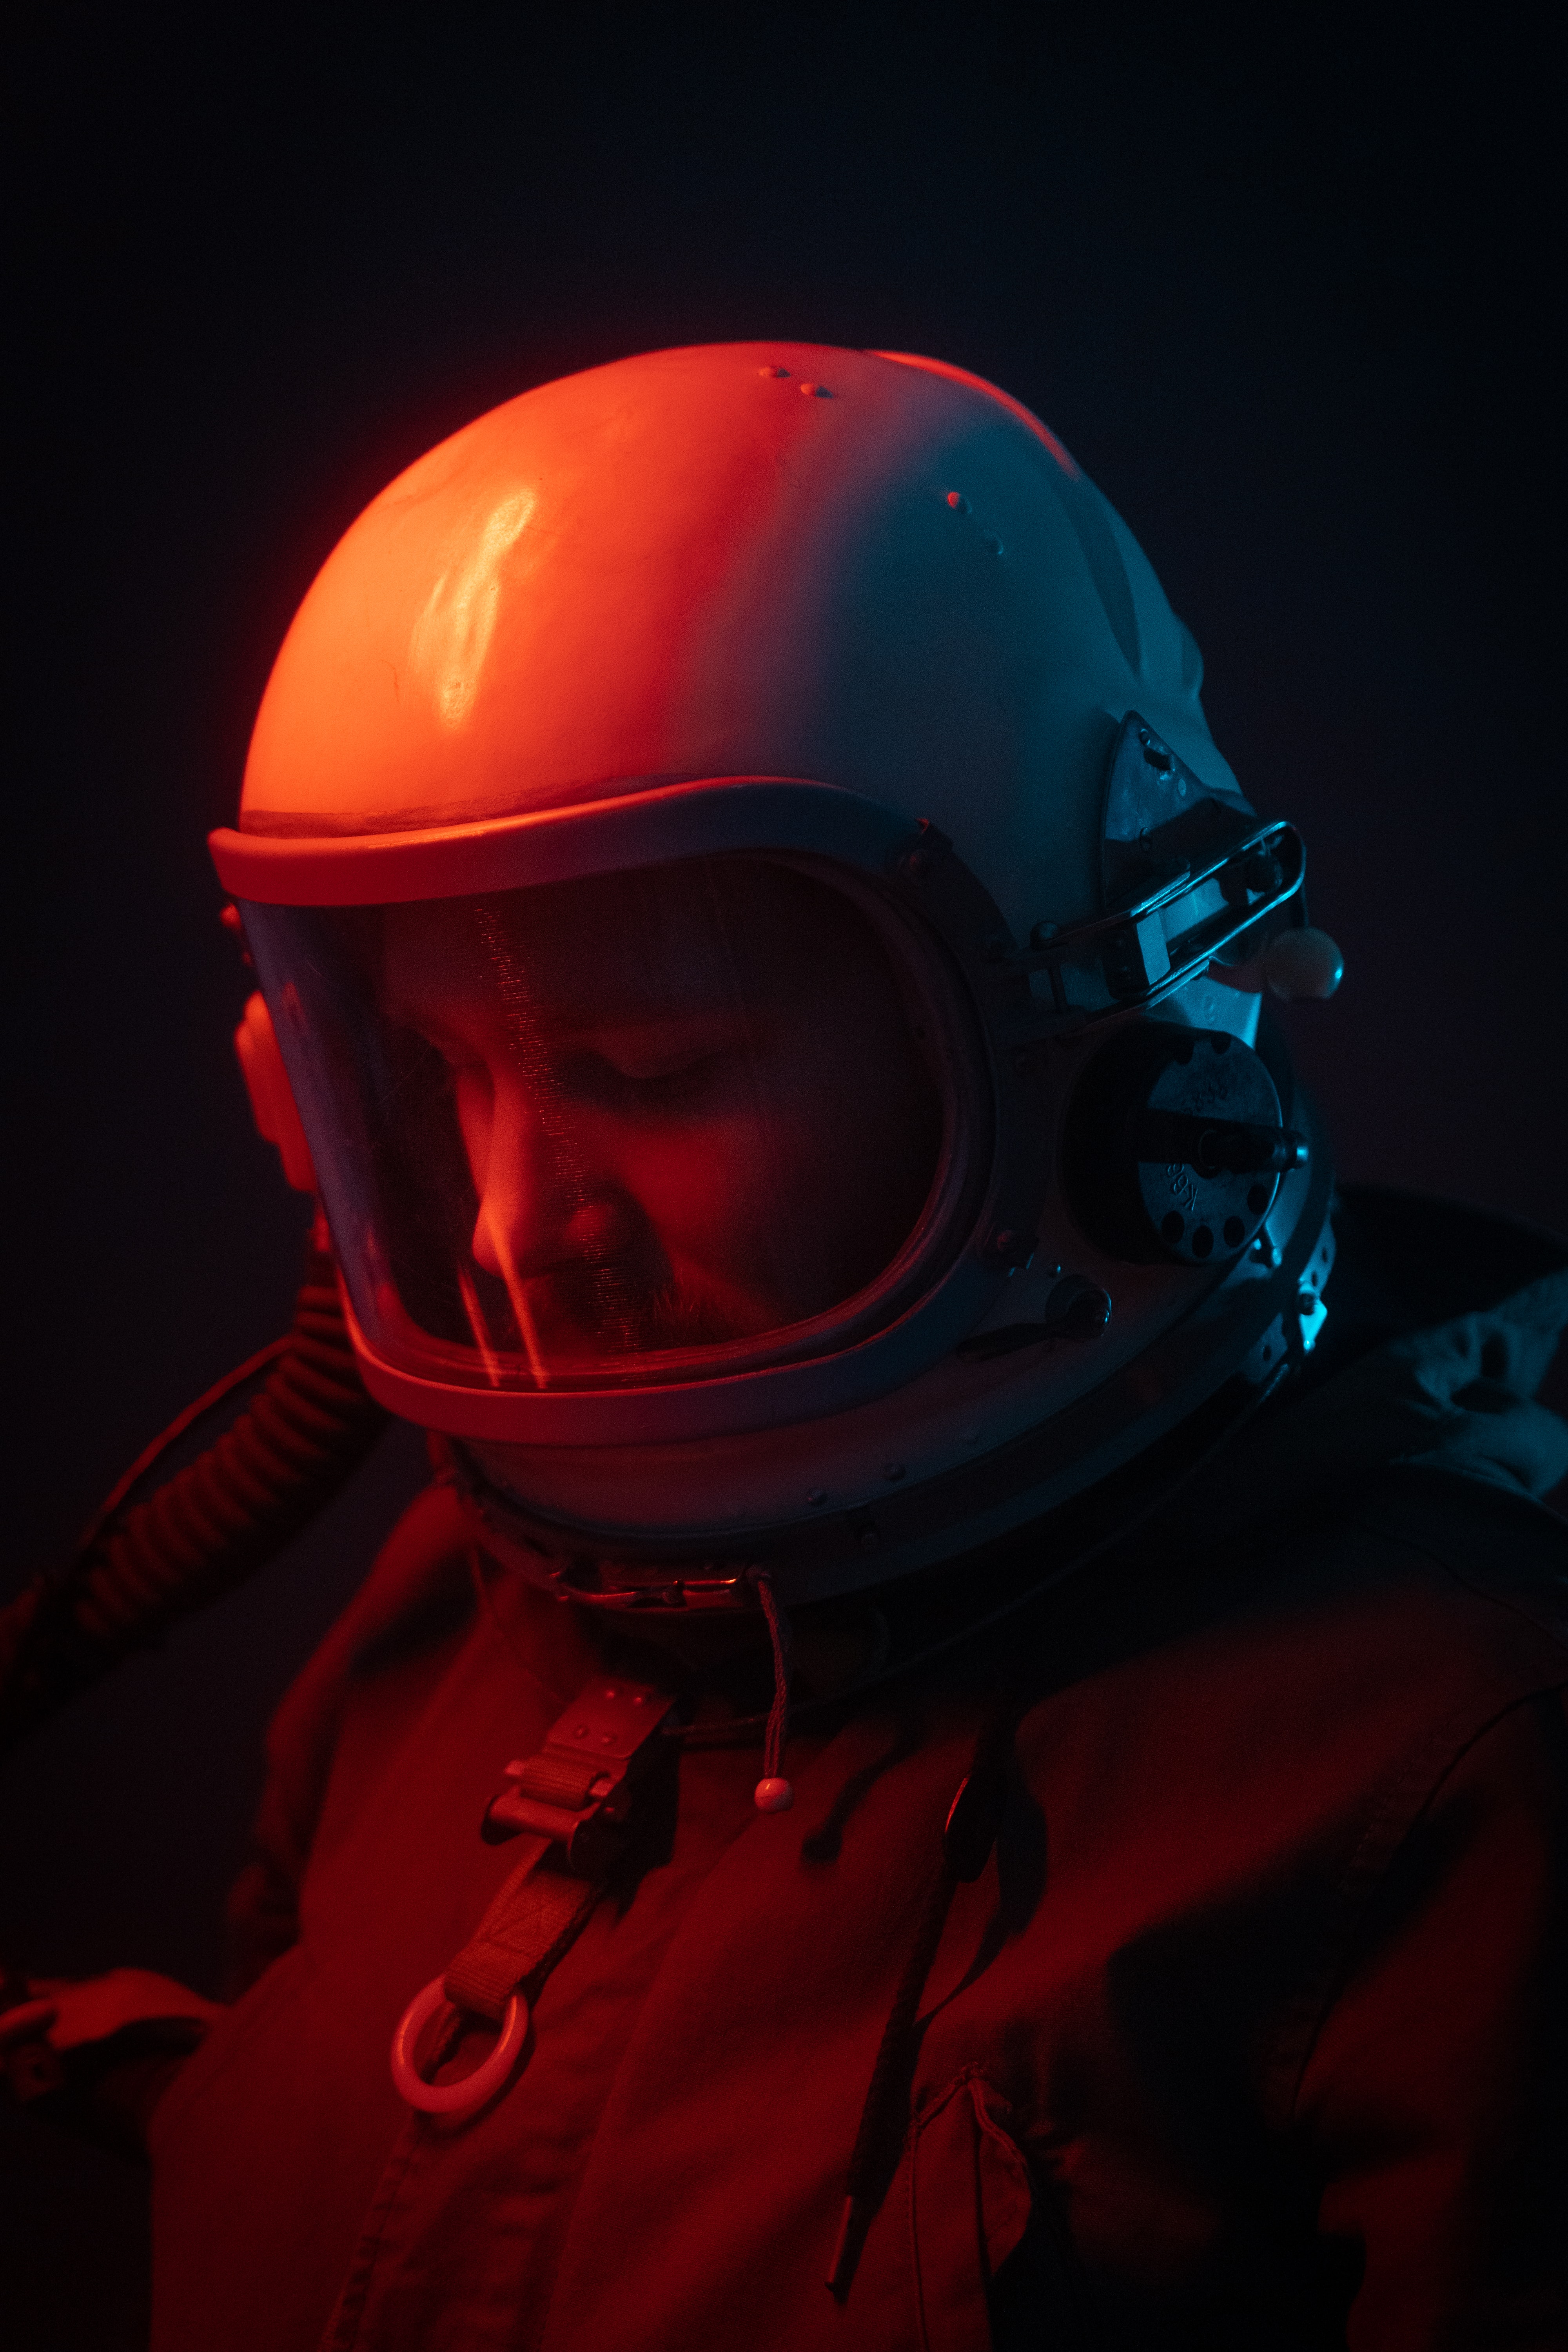 134401 Screensavers and Wallpapers Space Suit for phone. Download dark, miscellanea, miscellaneous, cosmonaut, spacesuit, space suit pictures for free